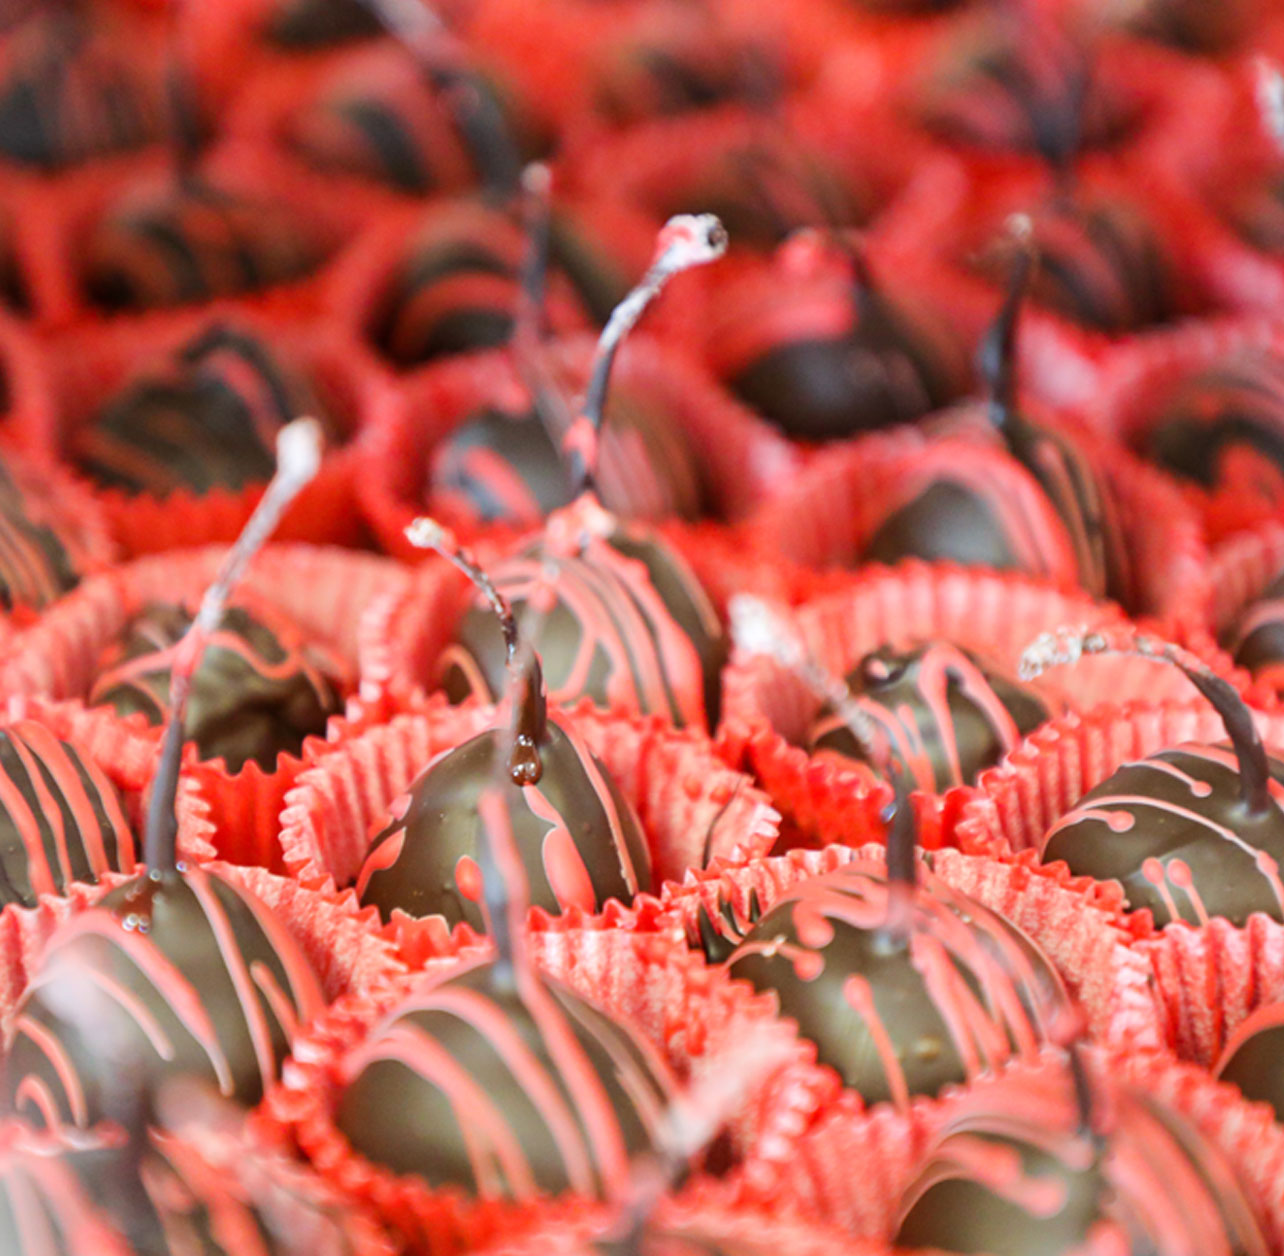  - Carber Chocolates - Delicious Hand-Made Chocolates - Chocolate Covered Cherries